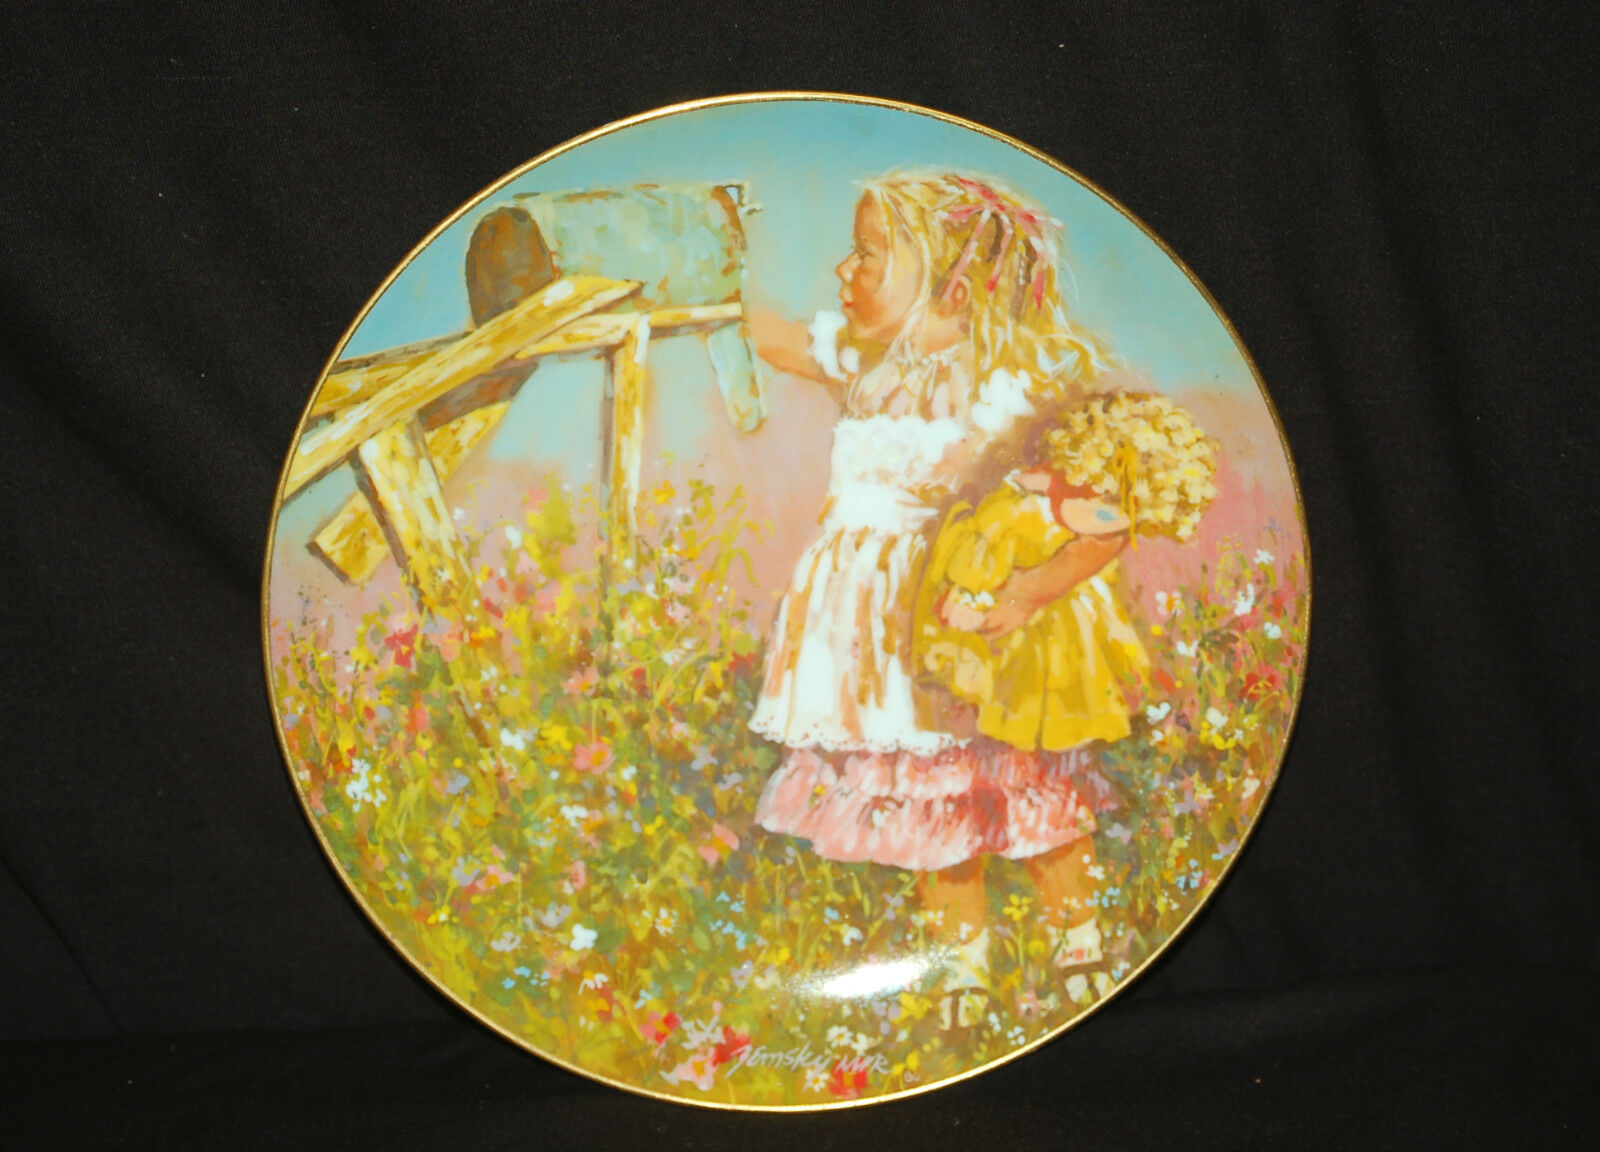 Primary image for Old Vintage 1981 Collectors Plate Star's Summer by Jessica Zensky Schmid #9081